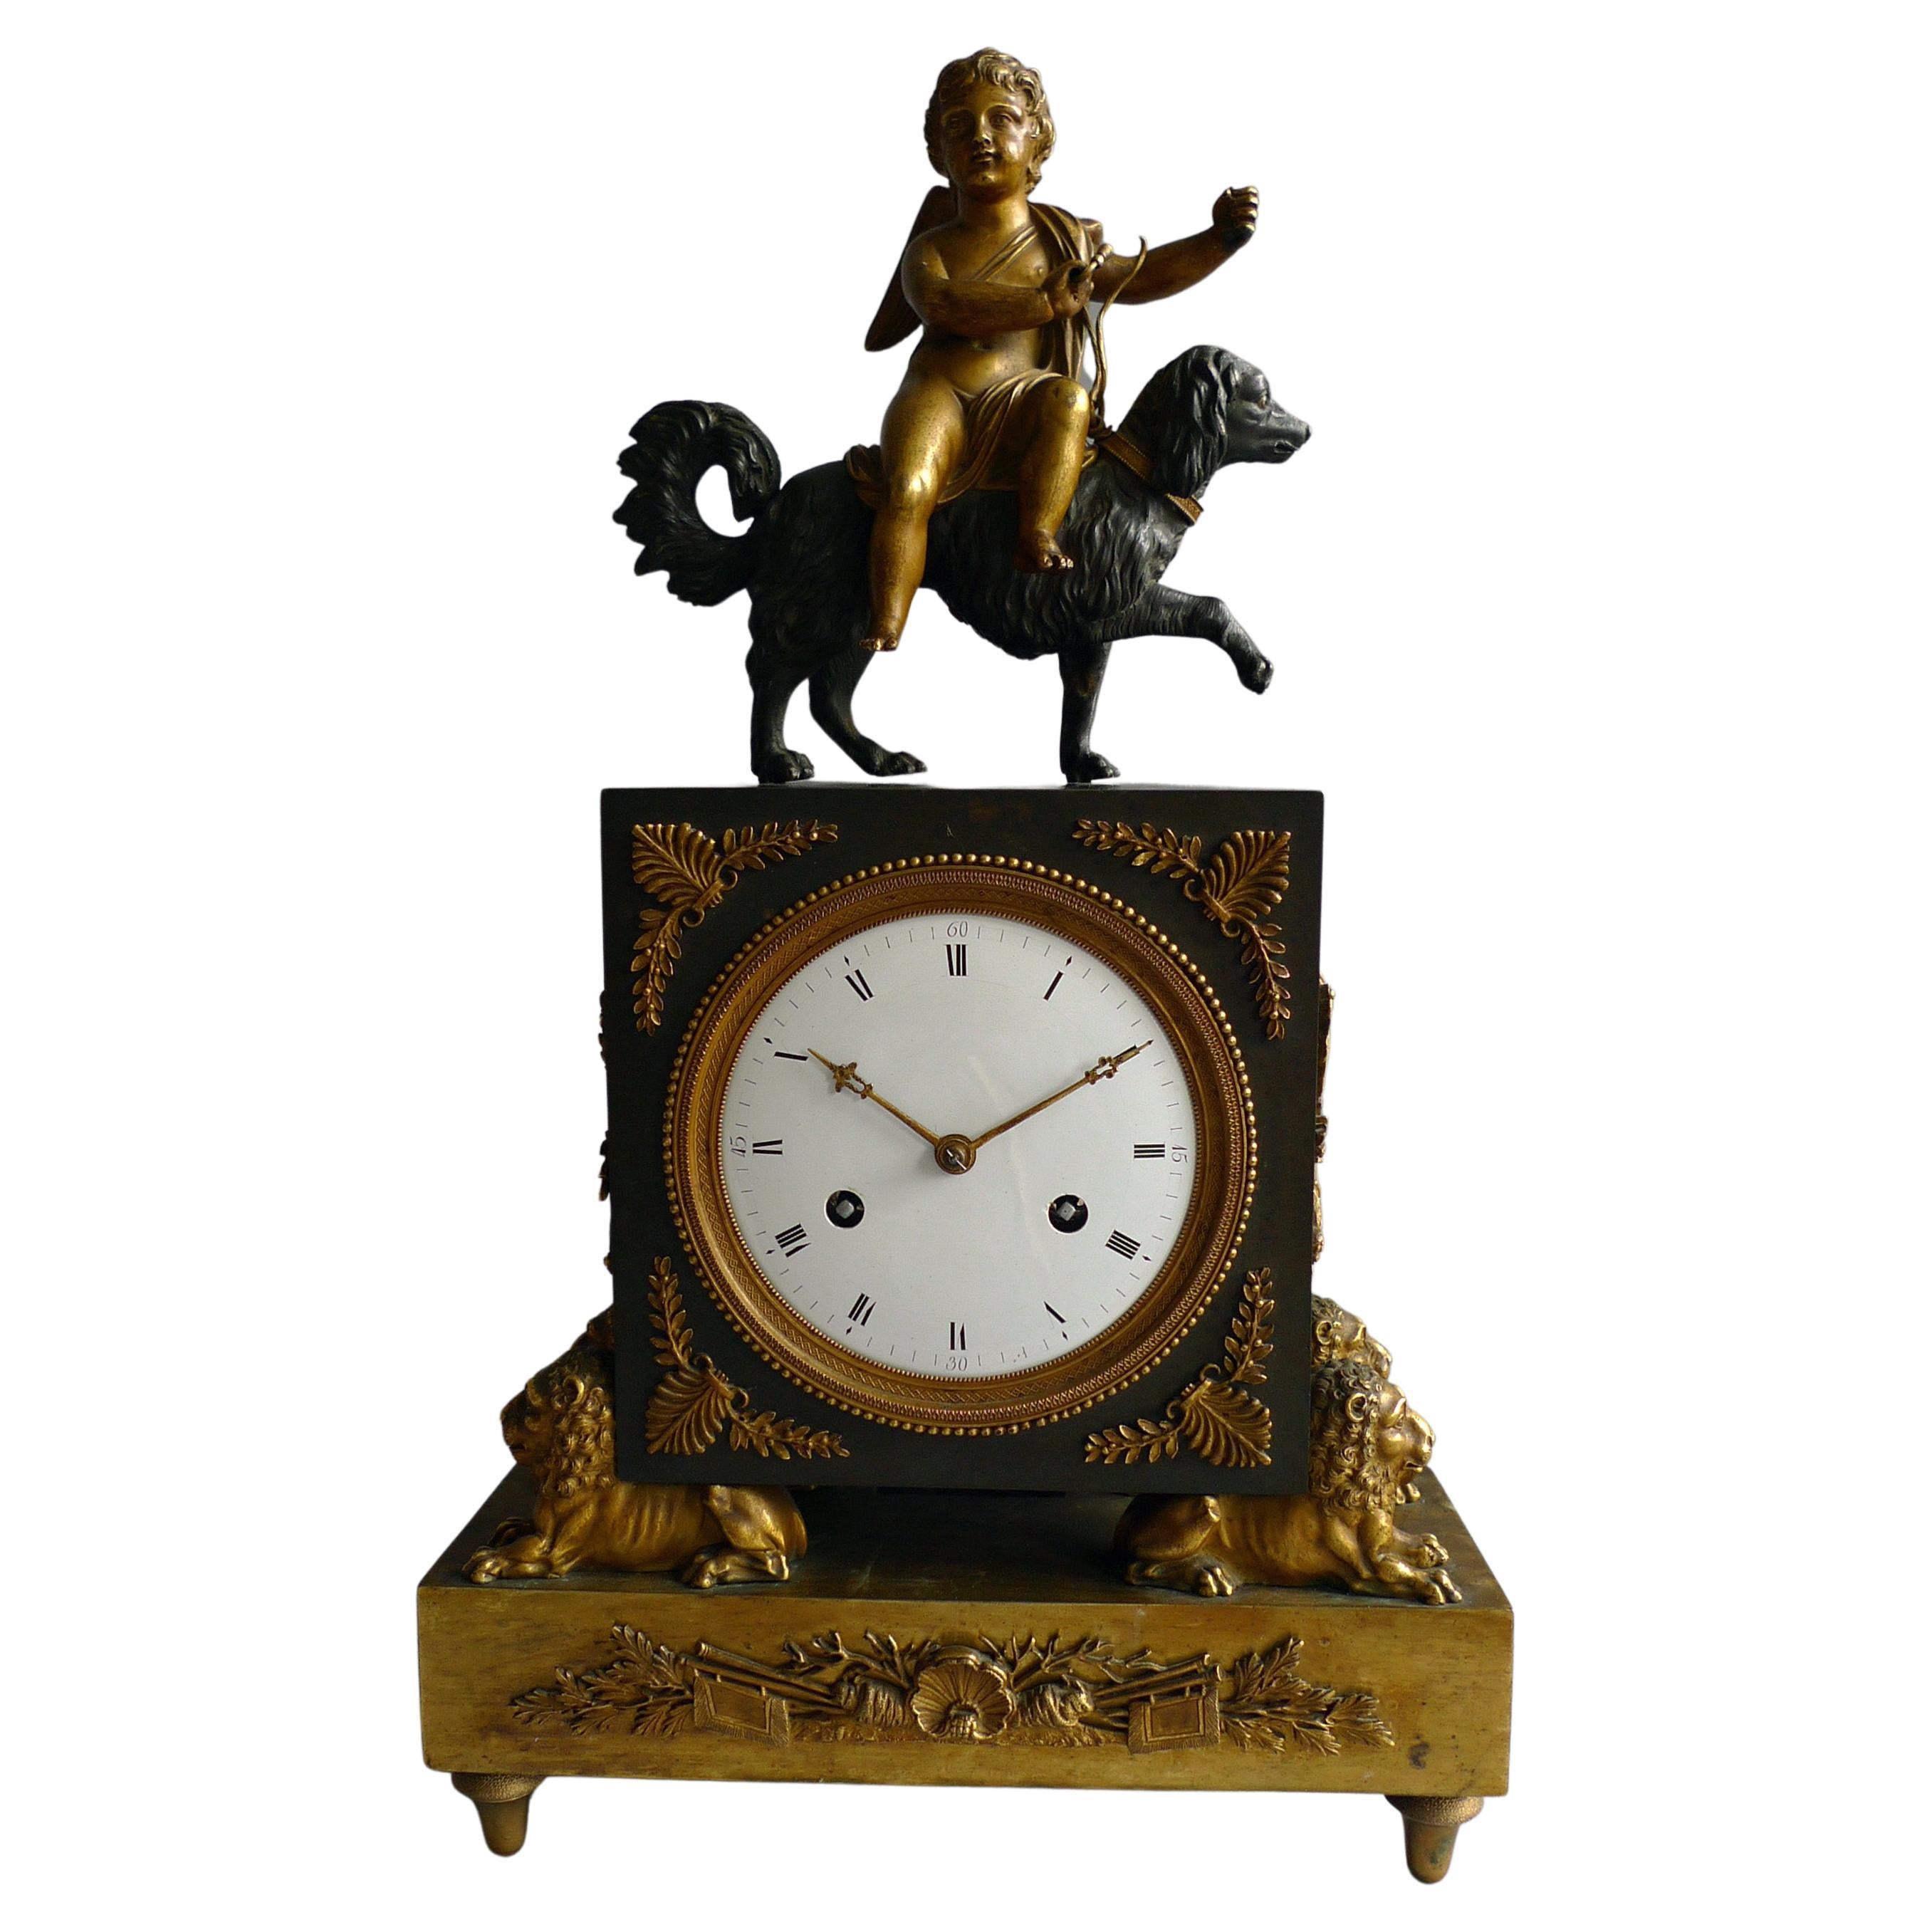 French Directoire or Empire Clock with Cupid Riding a Dog